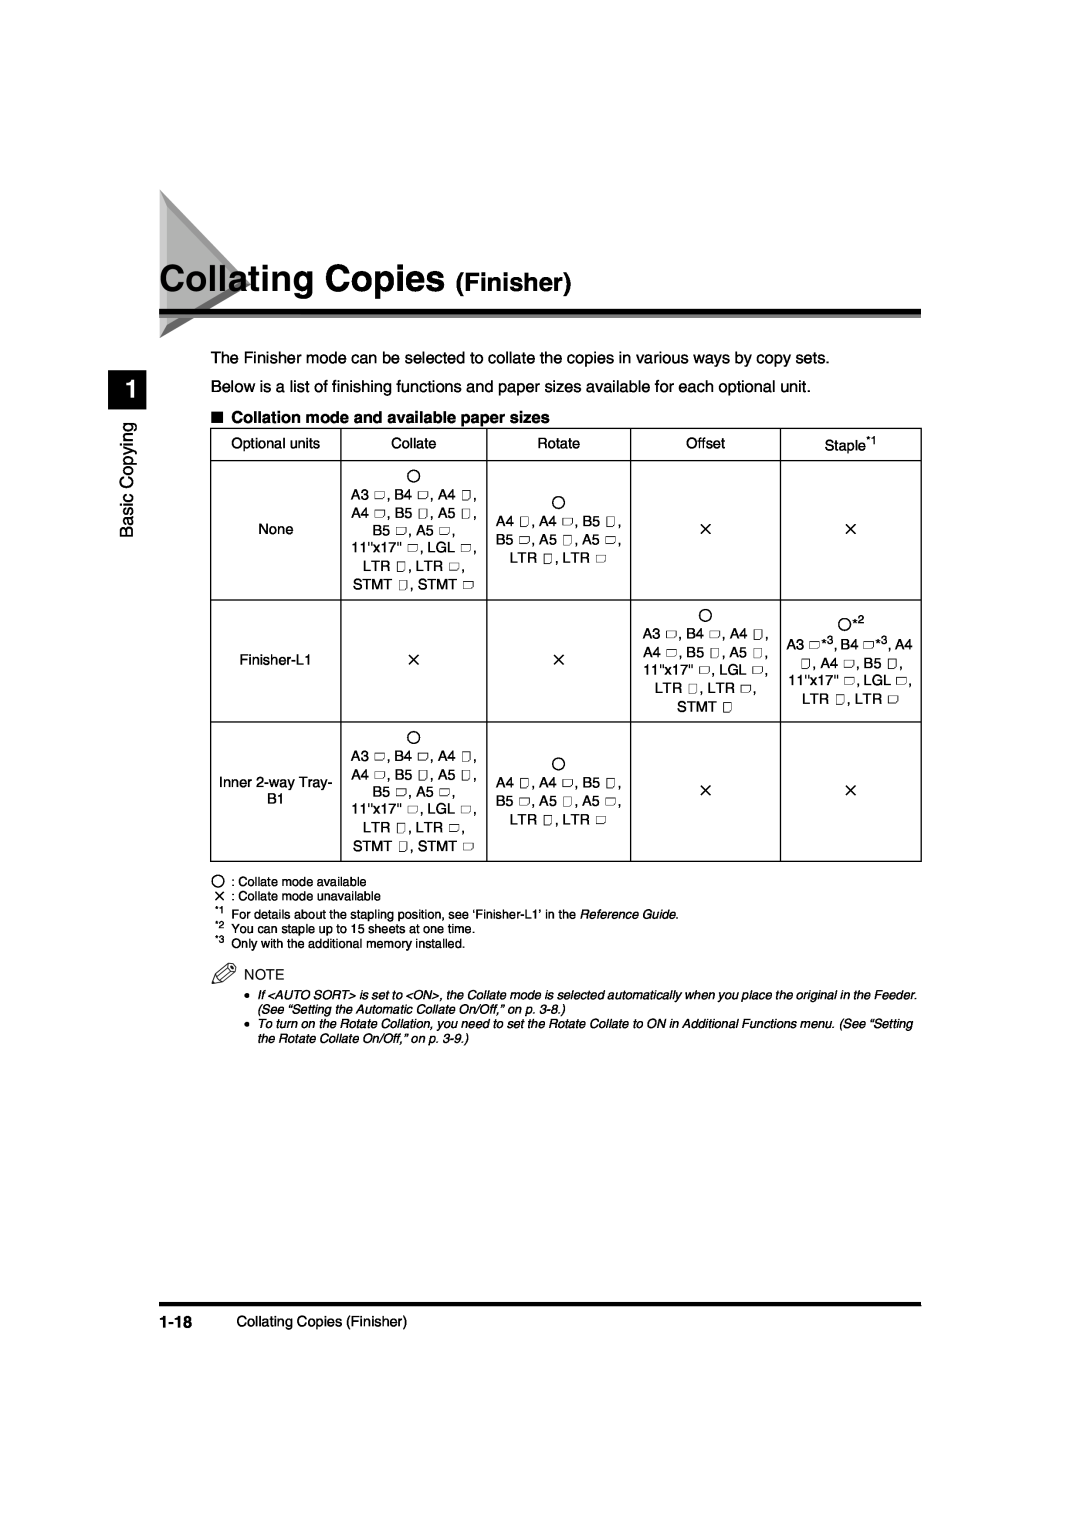 Canon IR1600 manual Collating Copies Finisher, Collation mode and available paper sizes, Basic Copying 